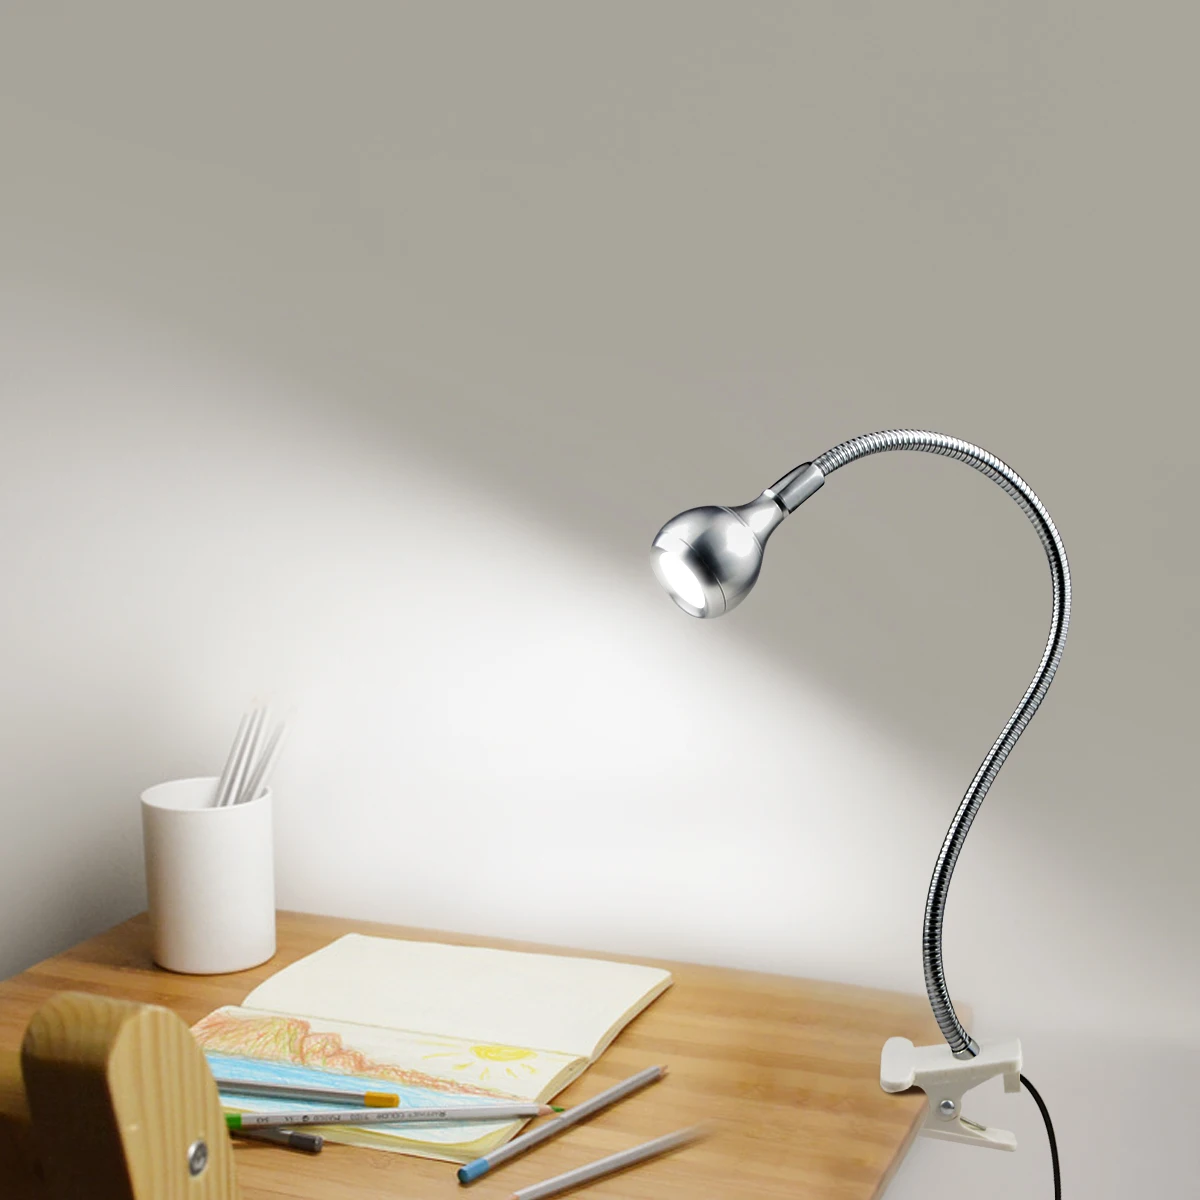 USB Power Lamp Reading Book Light With Holder Clip Flexible Table Lamp S... - $16.09